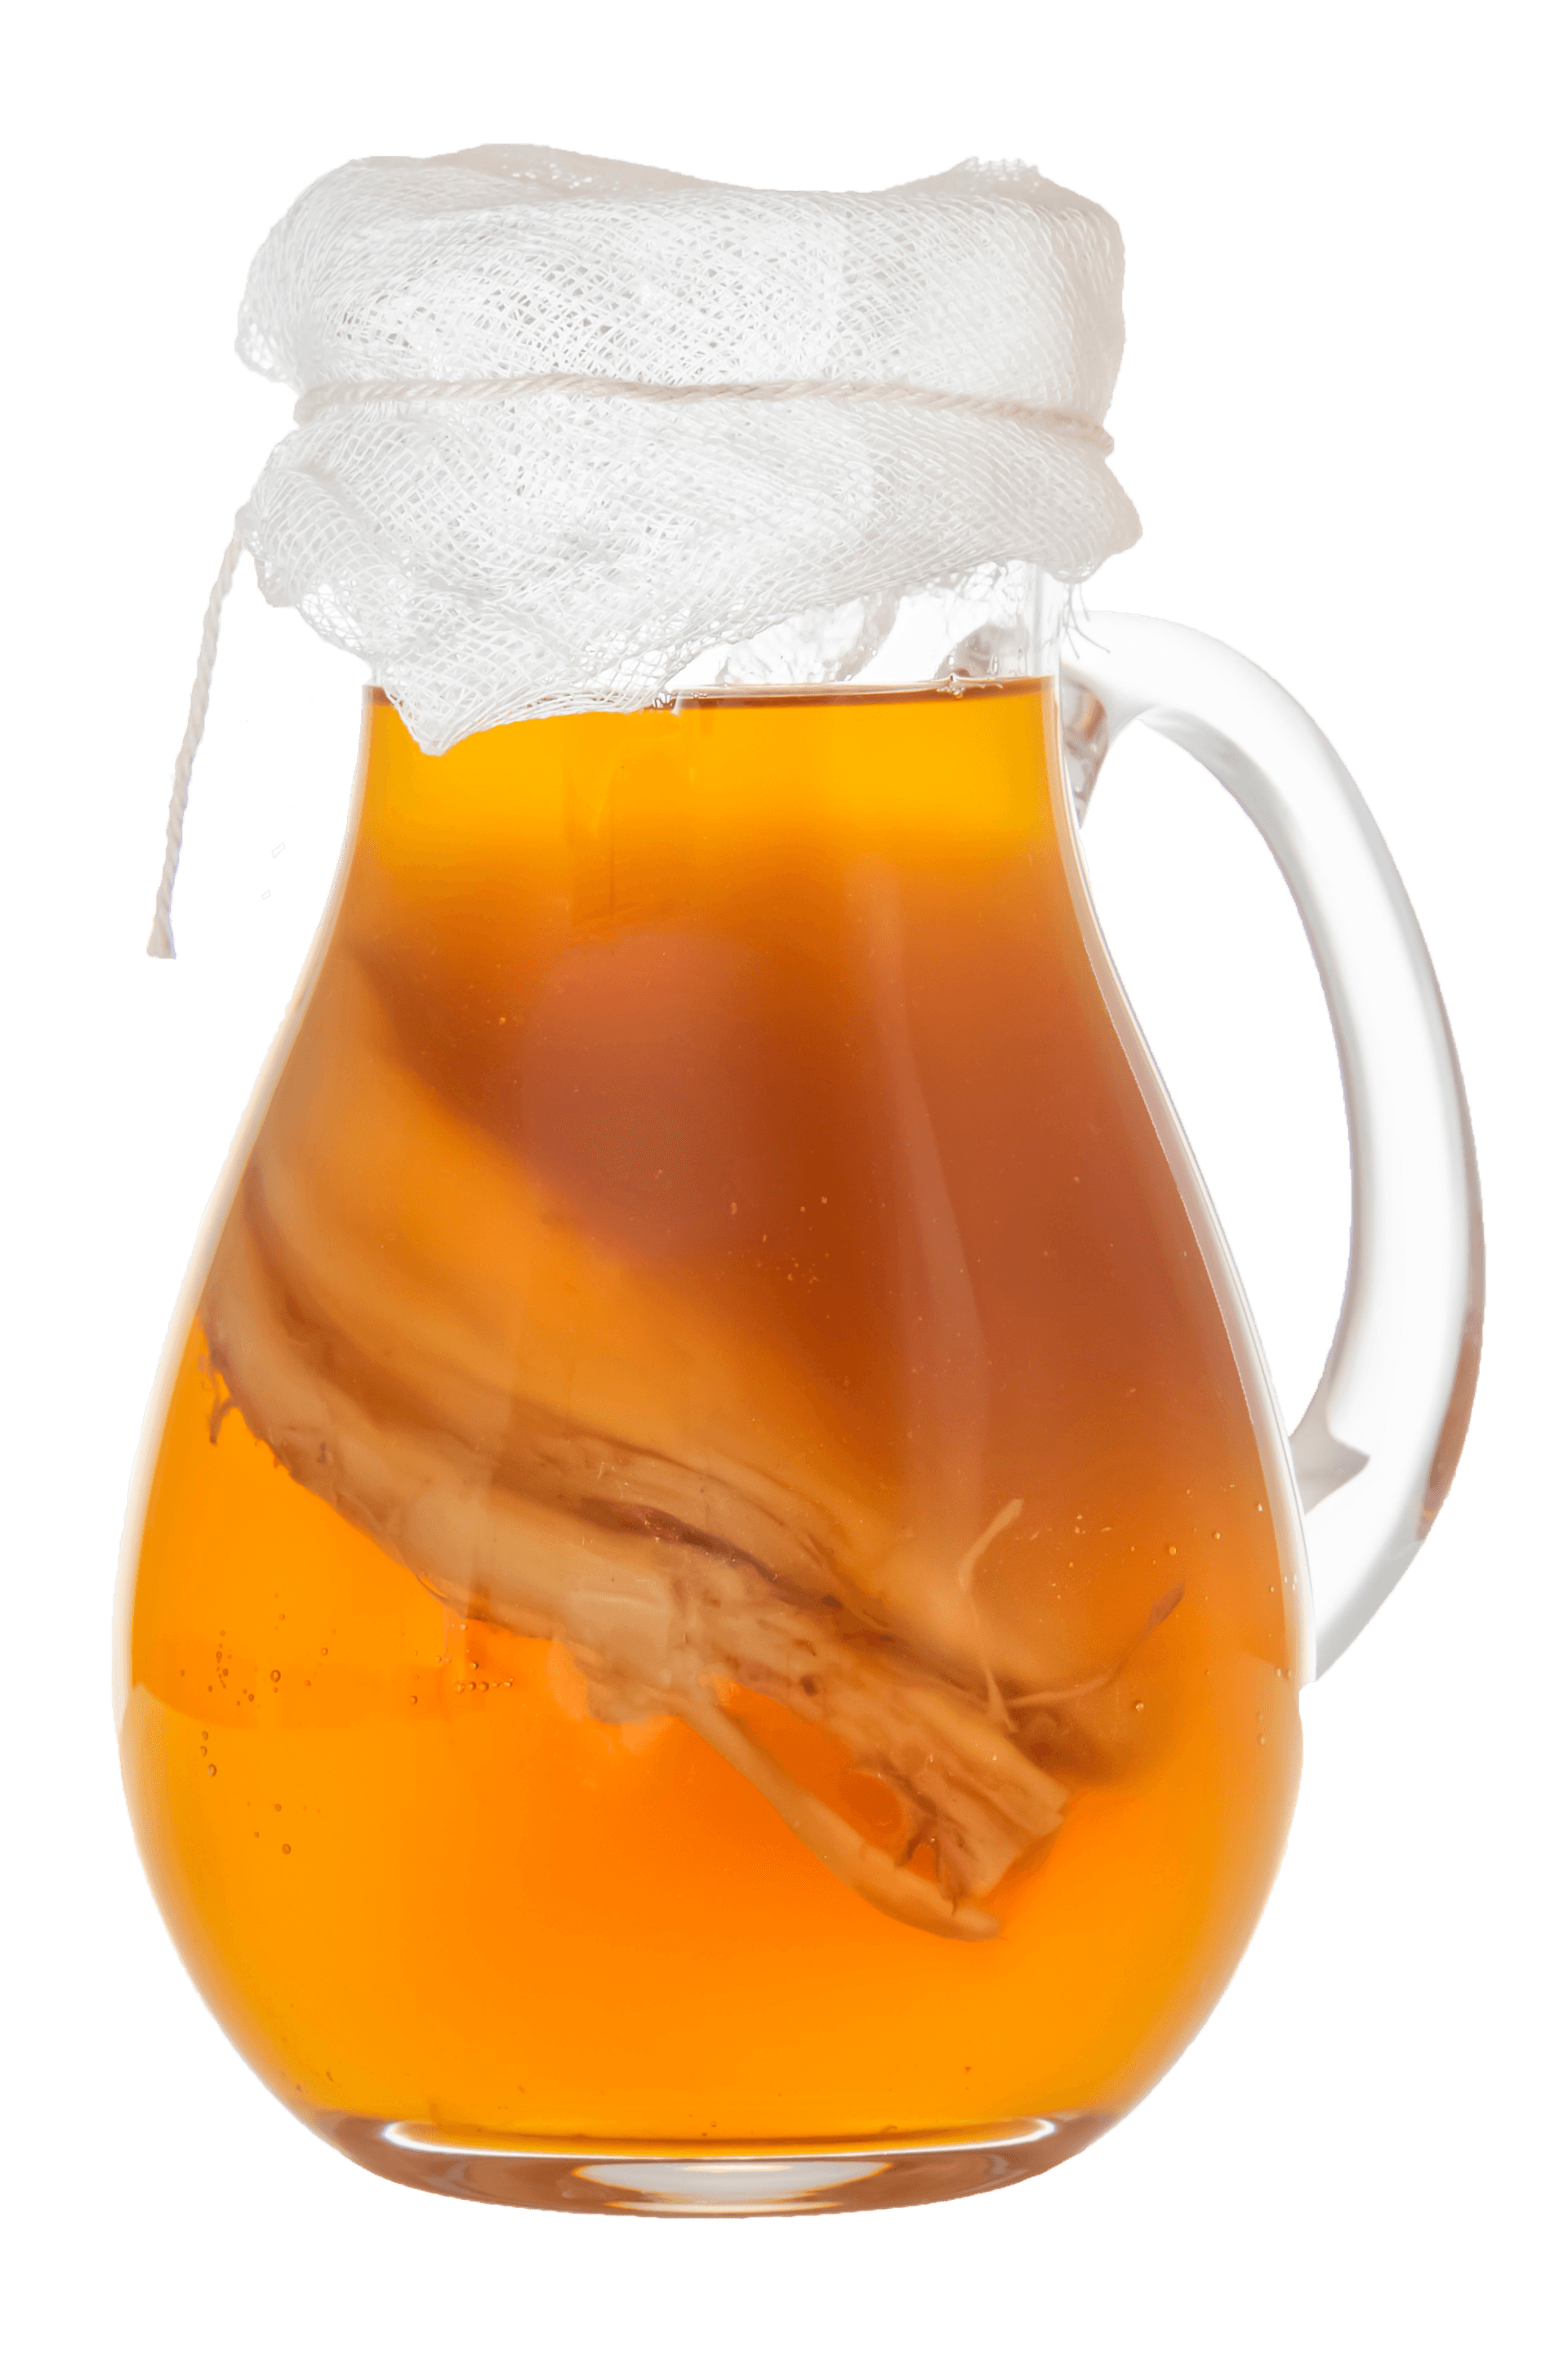 A pitcher of a fermented beverage